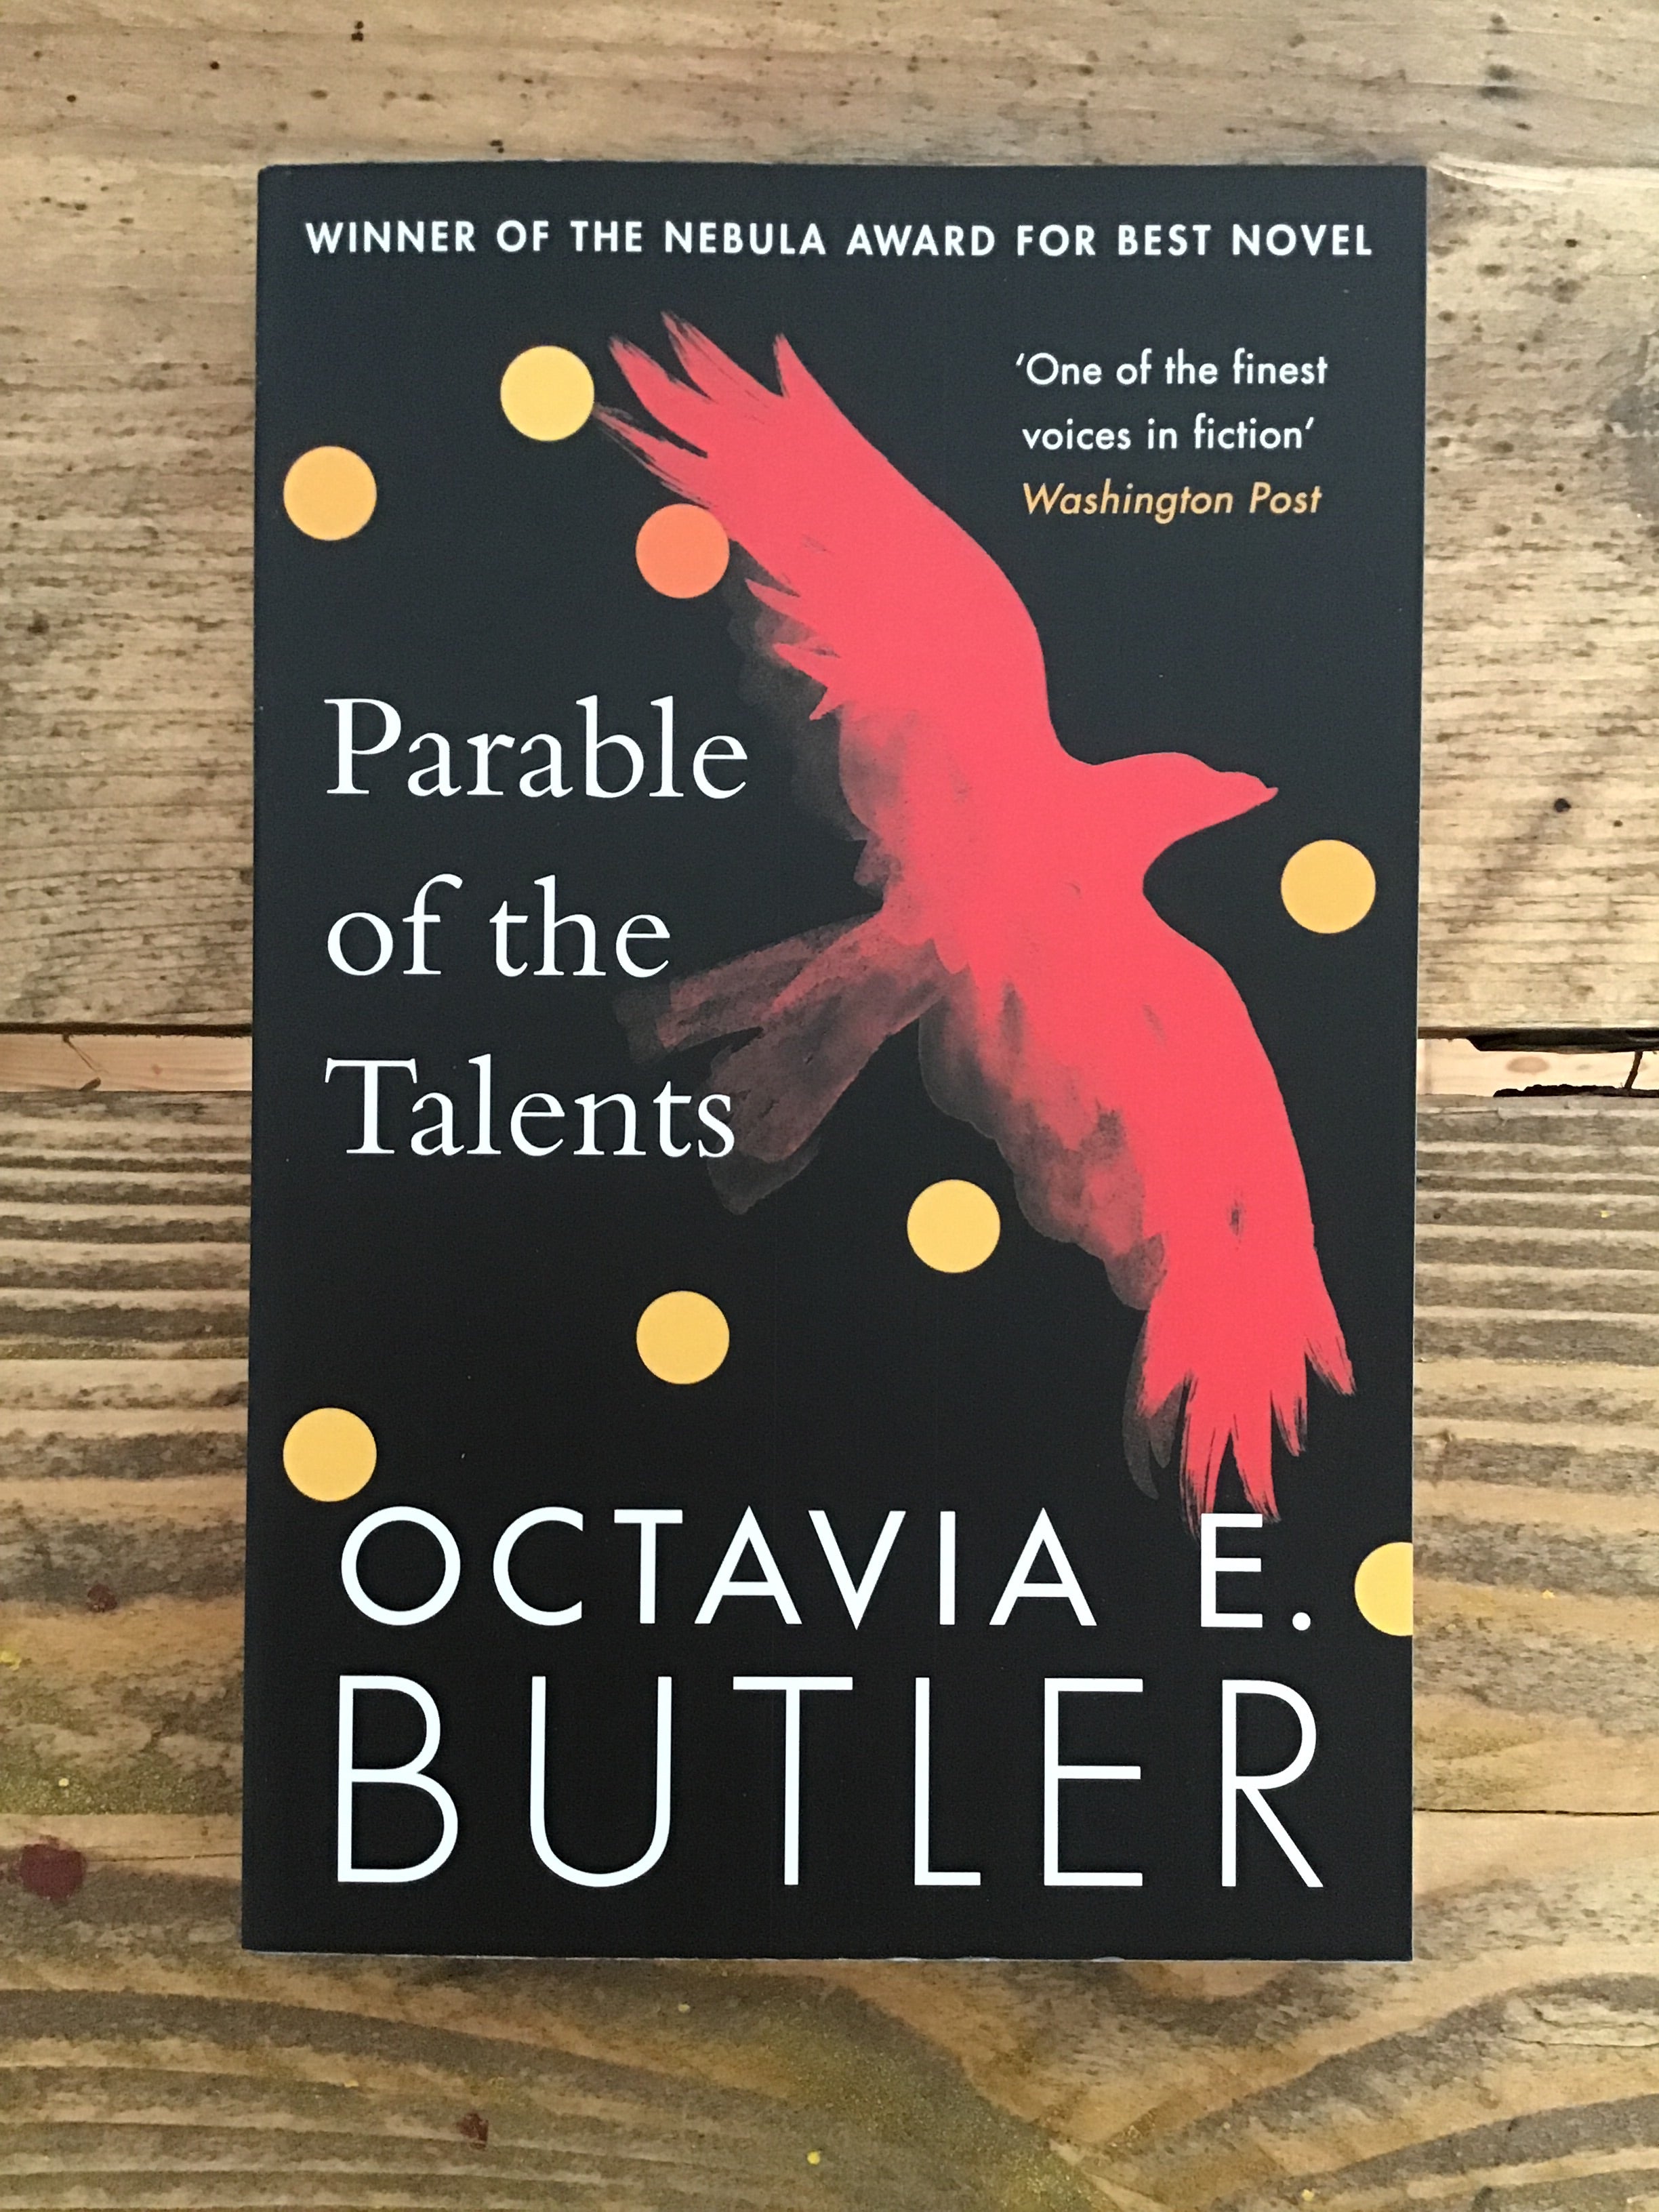 Parable of the talents by Octavia E. Butler